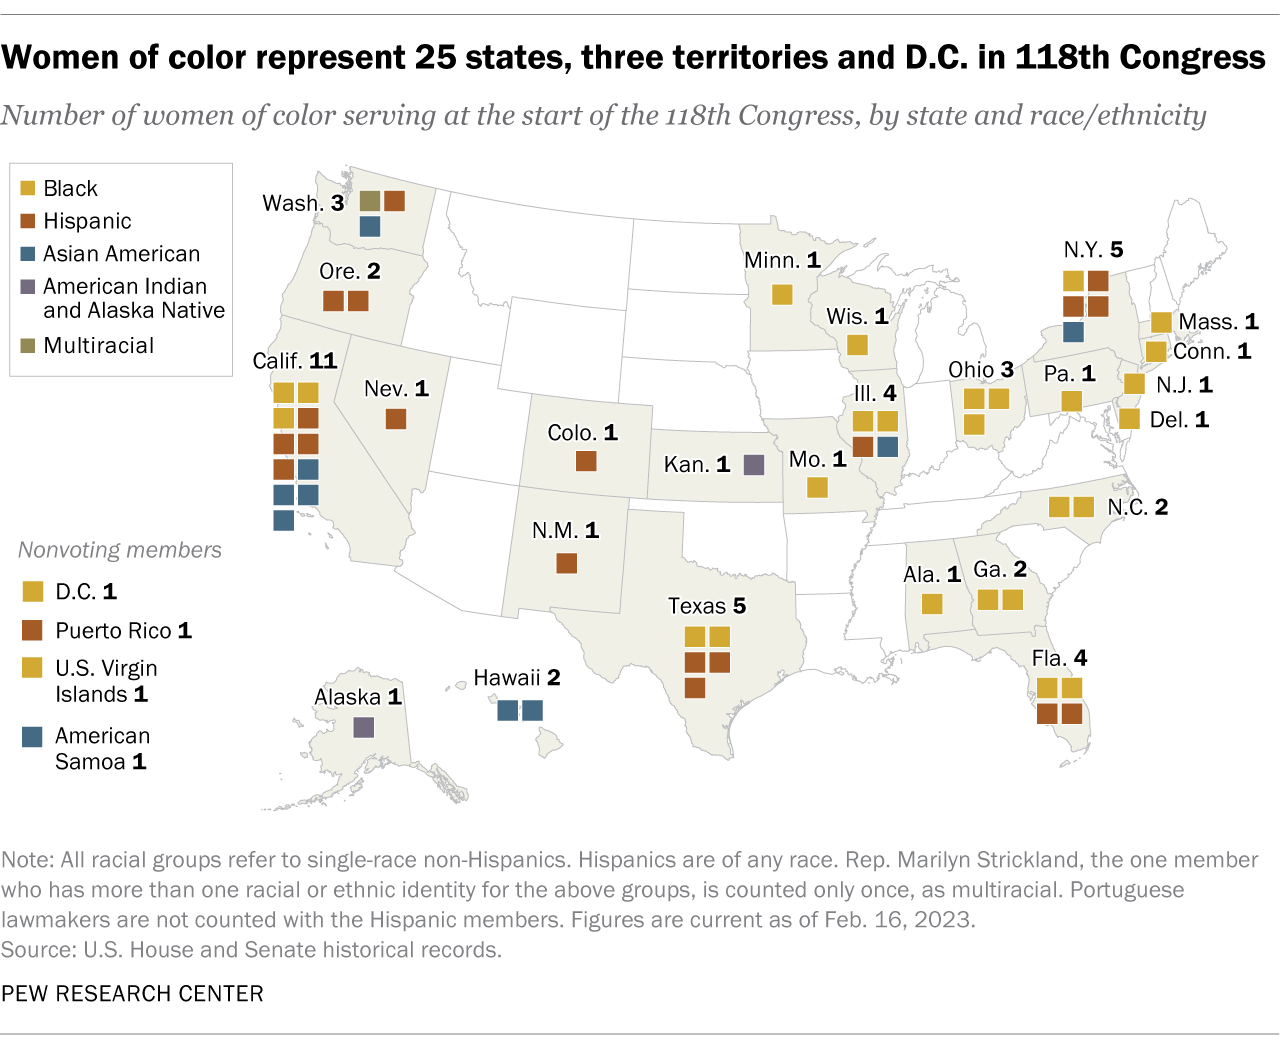 A map showing that women of color represent 25 states, three territories and D.C. in 118th Congress